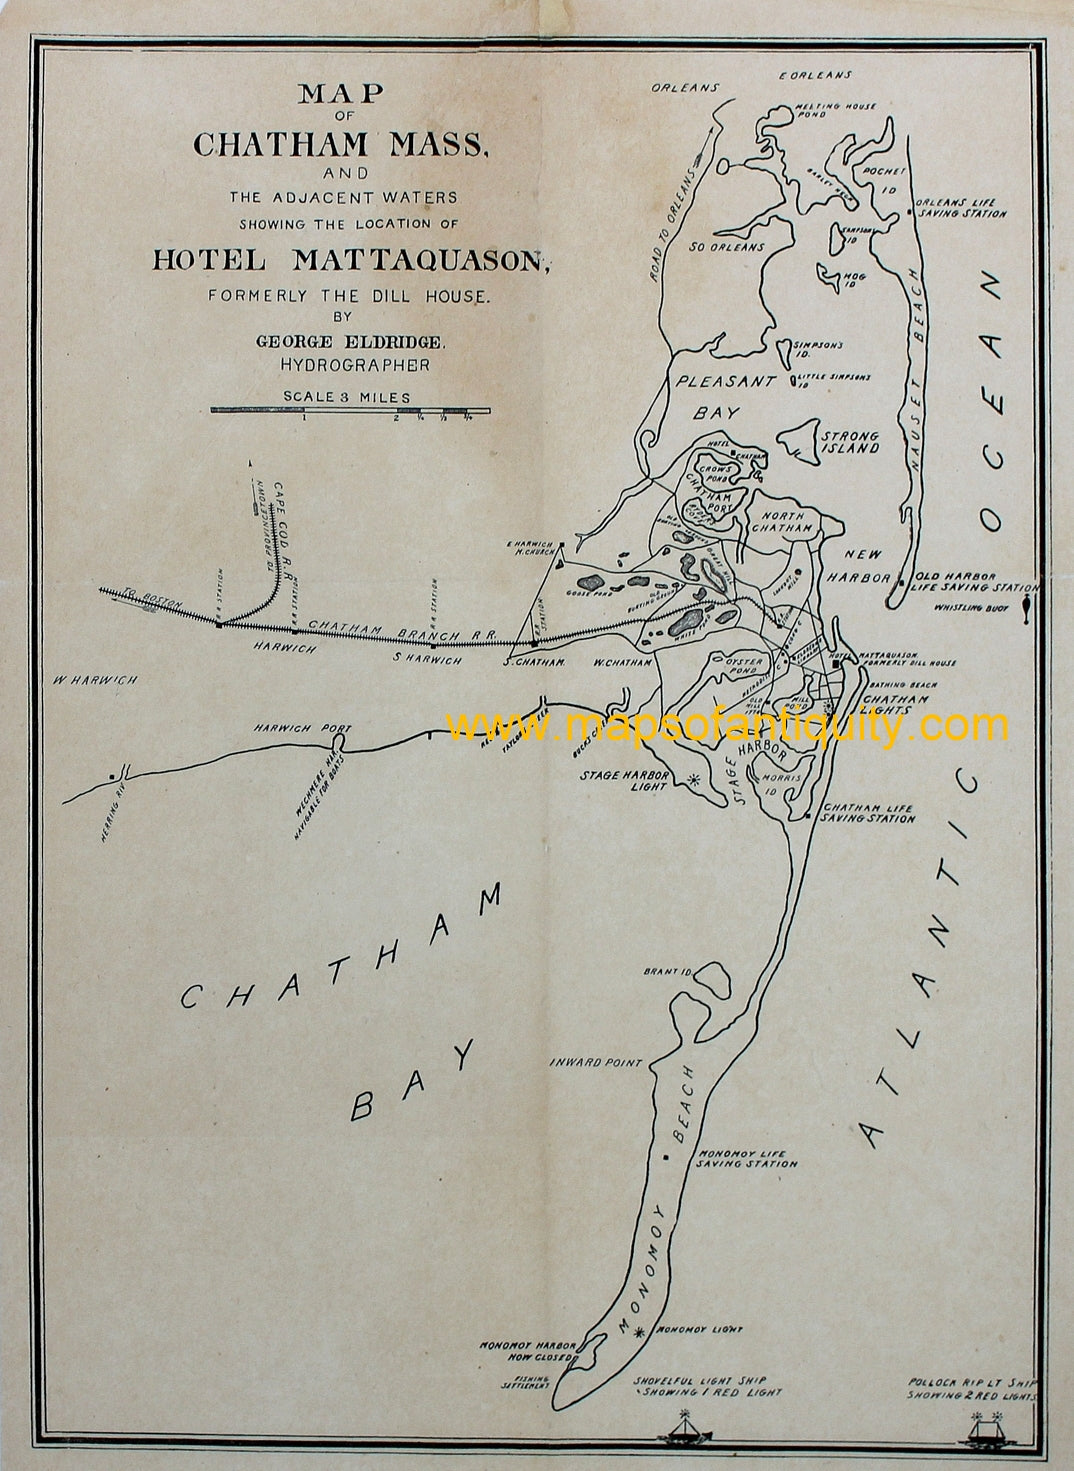 Reproduction-Map-of-Chatham-Mass.-and-the-Adjacent-Waters-Showing-the-Location-of-Hotel-Mattaquason-Formerly-the-Dill-House.---Reproduction-Reproductions-Cape-Cod-Chatham-Reproduction--Maps-Of-Antiquity